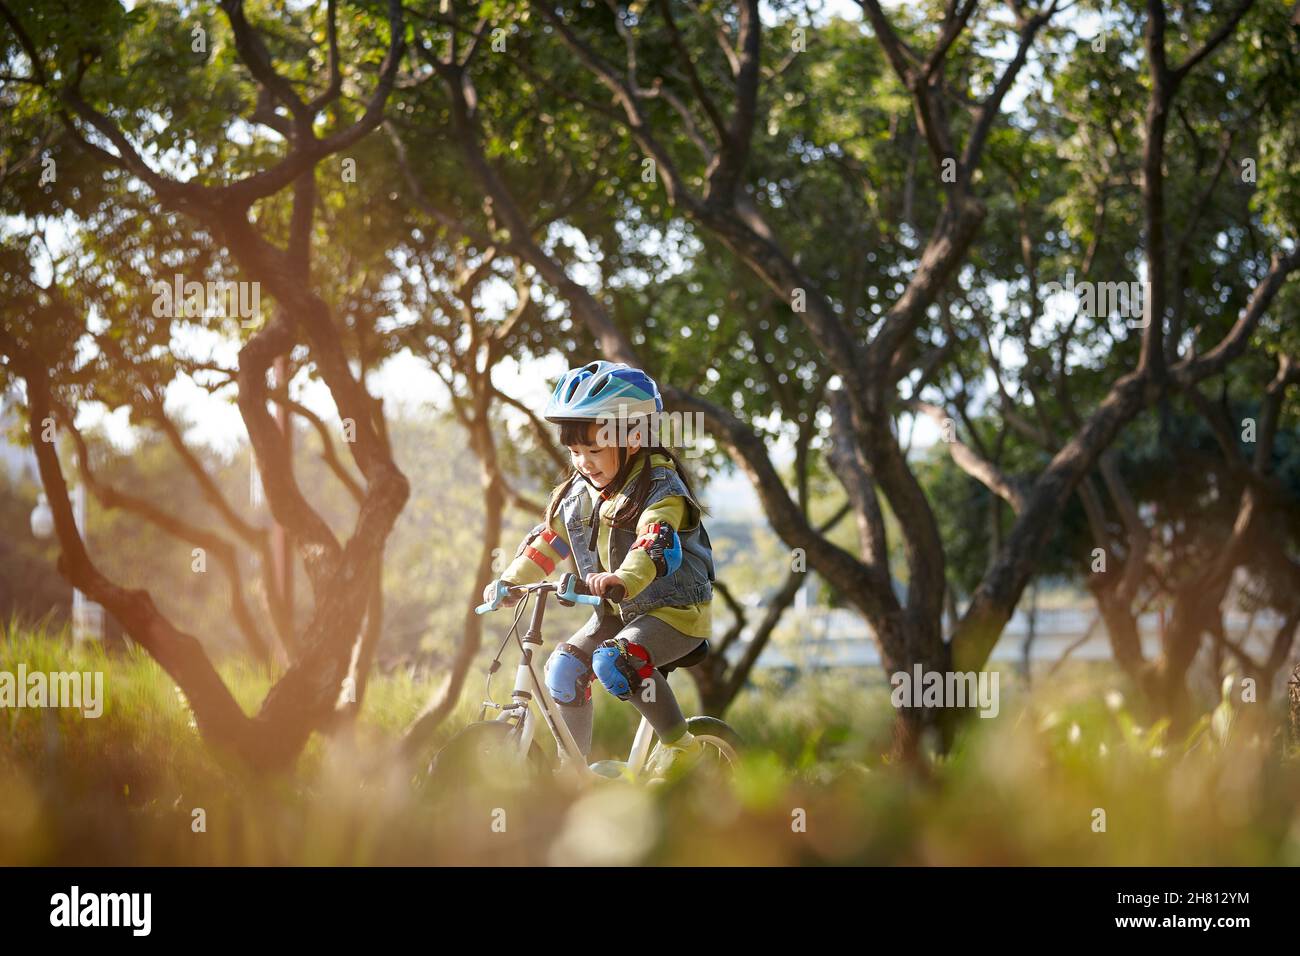 lovely happy asian little girl with helmet and full protection gear riding bike in city park Stock Photo